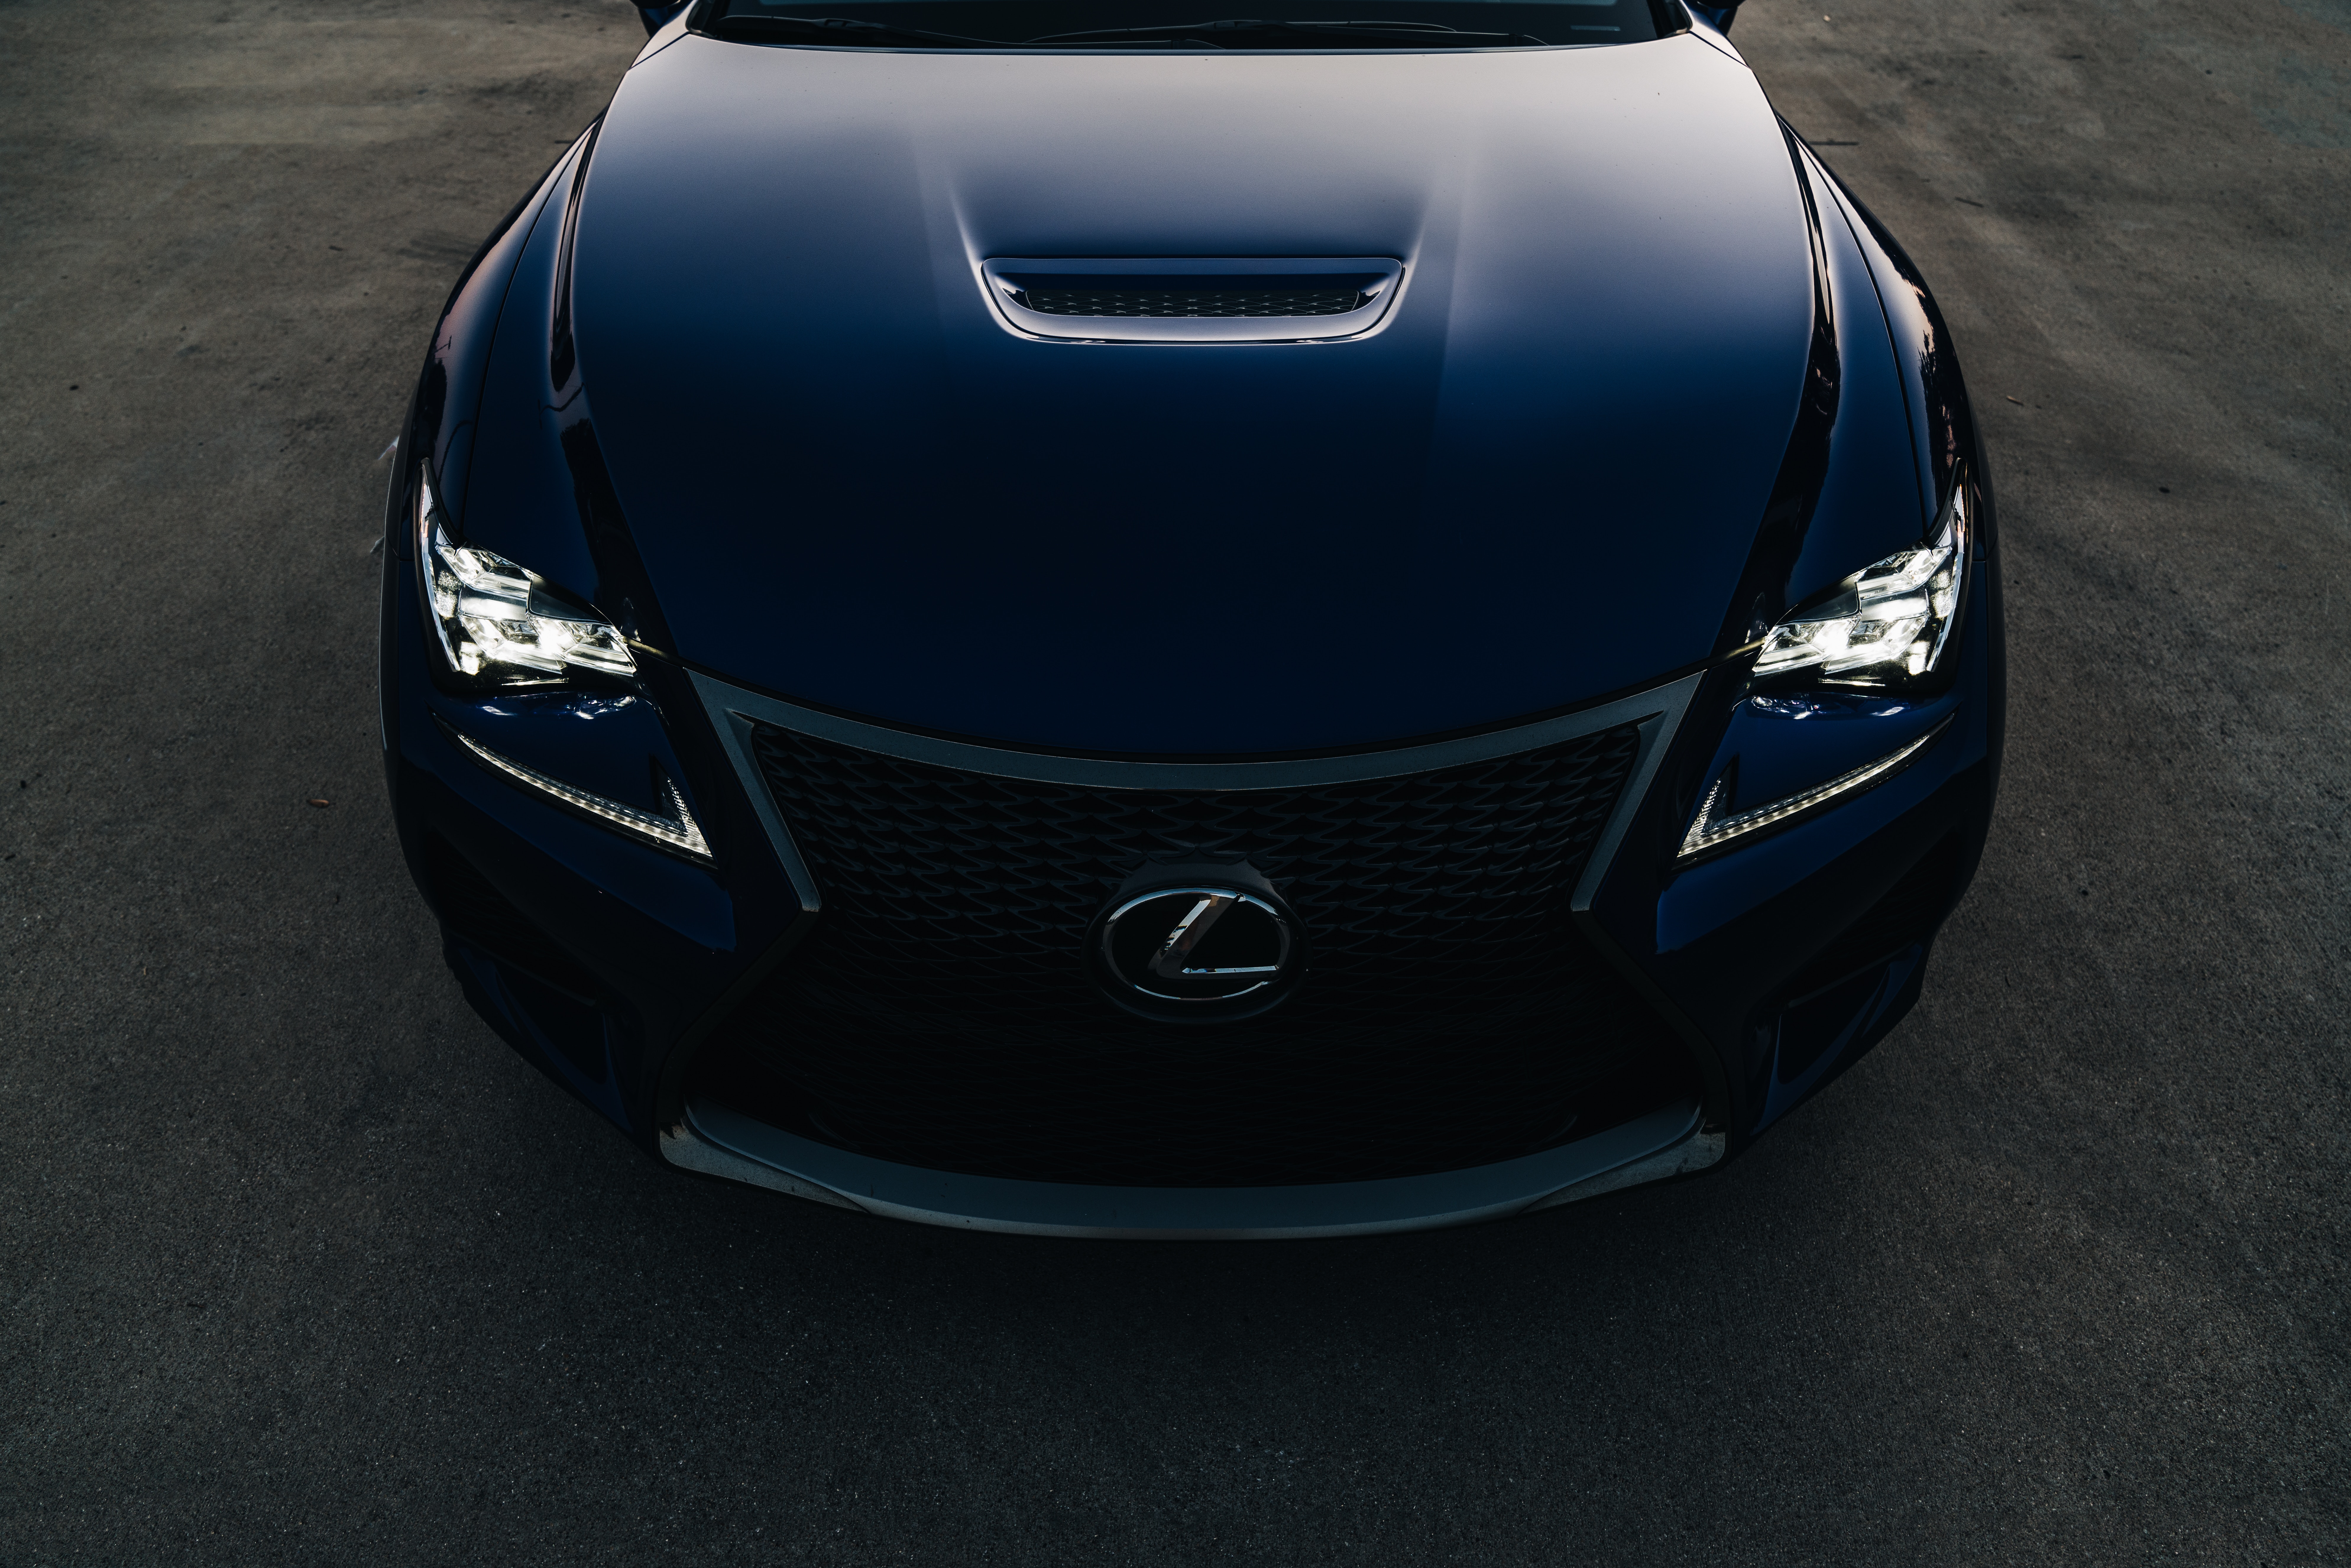 92461 Screensavers and Wallpapers Hood for phone. Download lexus, cars, front view, headlight, hood, lexus rc f pictures for free